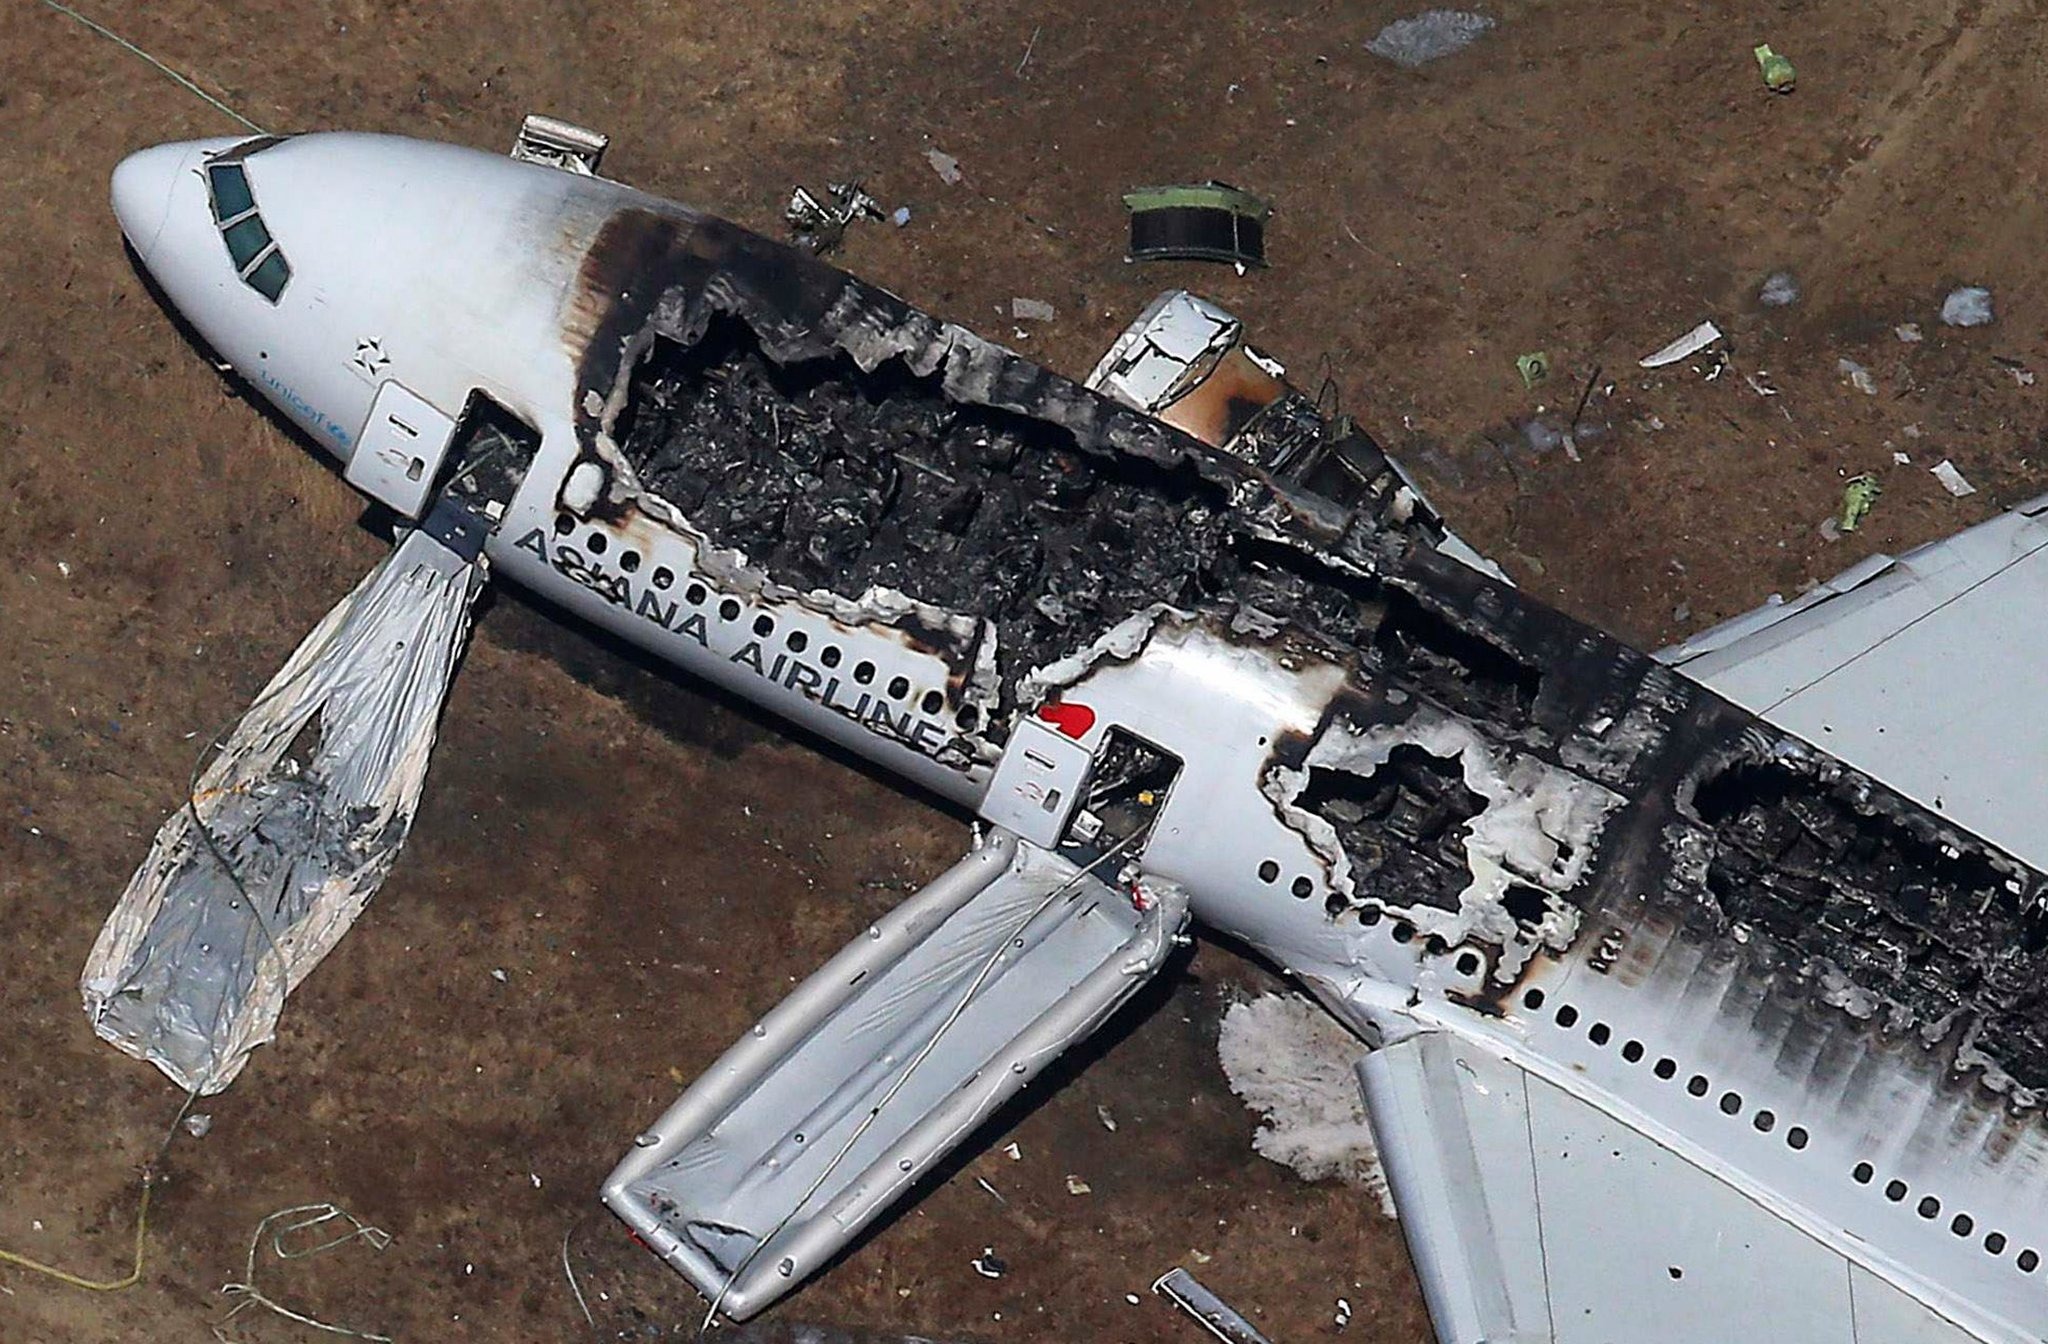 I read an article a long time ago about a aircraft maintenance worker not removing a piece of tape that was put in place to protect a sensor during cleaning. The pilot failed to notice during the preflight inspection. More than a hundred people died in the plane crash.